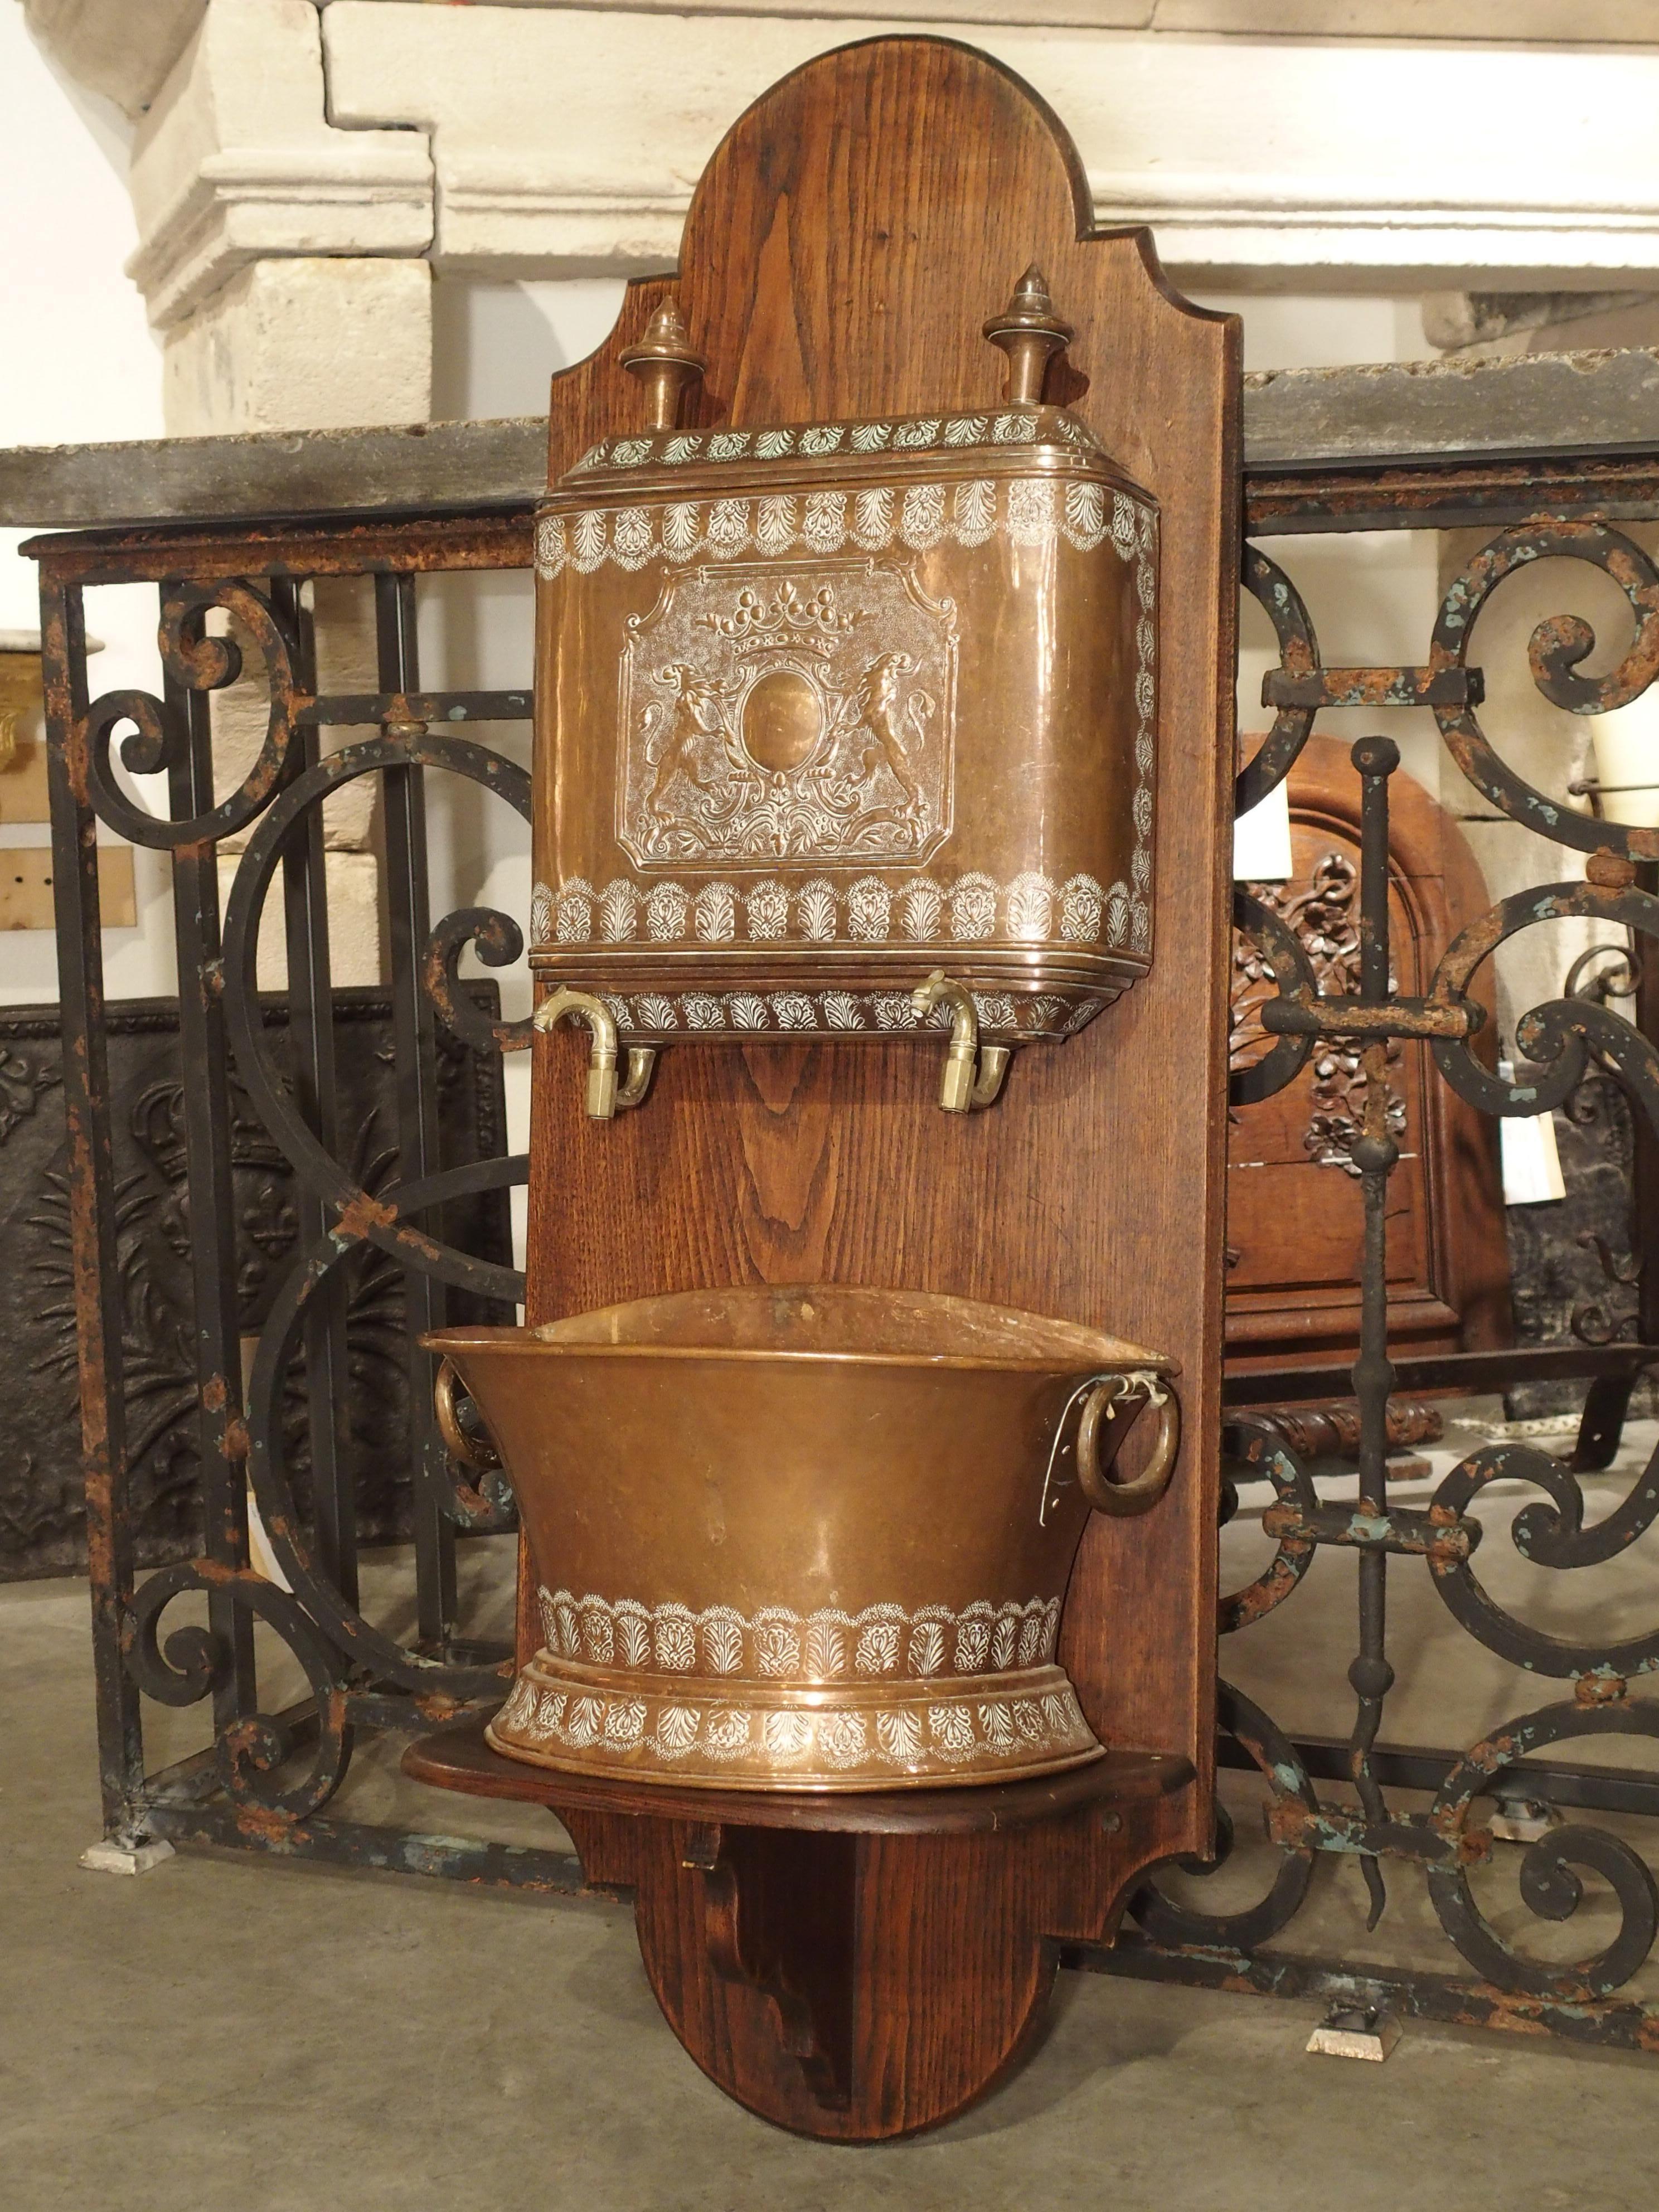 This highly worked 19th century French repousse copper lavabo on carved wooden stand has a coat of arms on the front of the upper storage tank where the water is held. Two bronze spigots would have allowed the water to empty into the bottom basin.